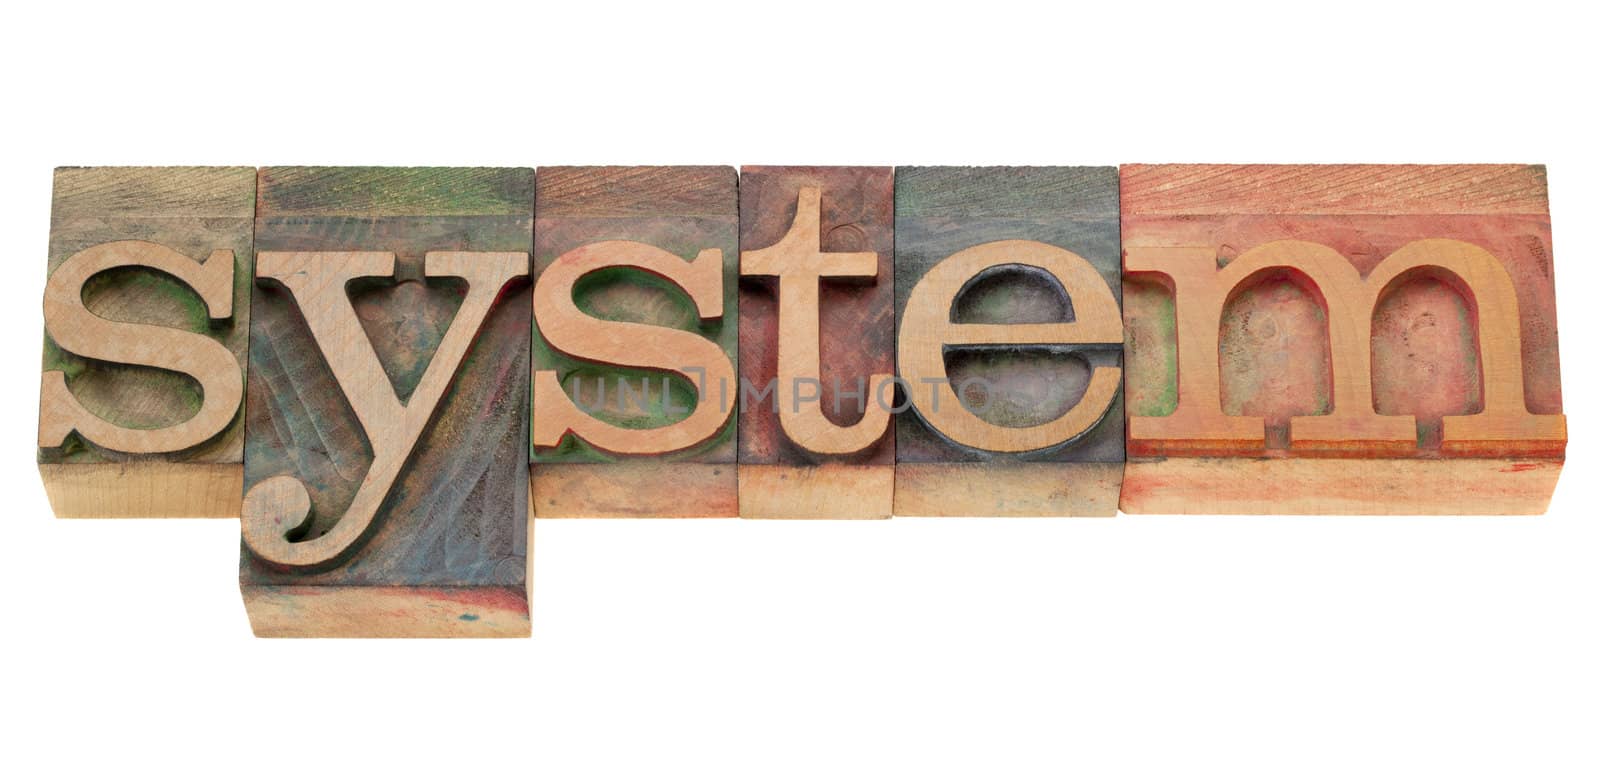 system - isolated word in vintage wood letterpress printing blocks